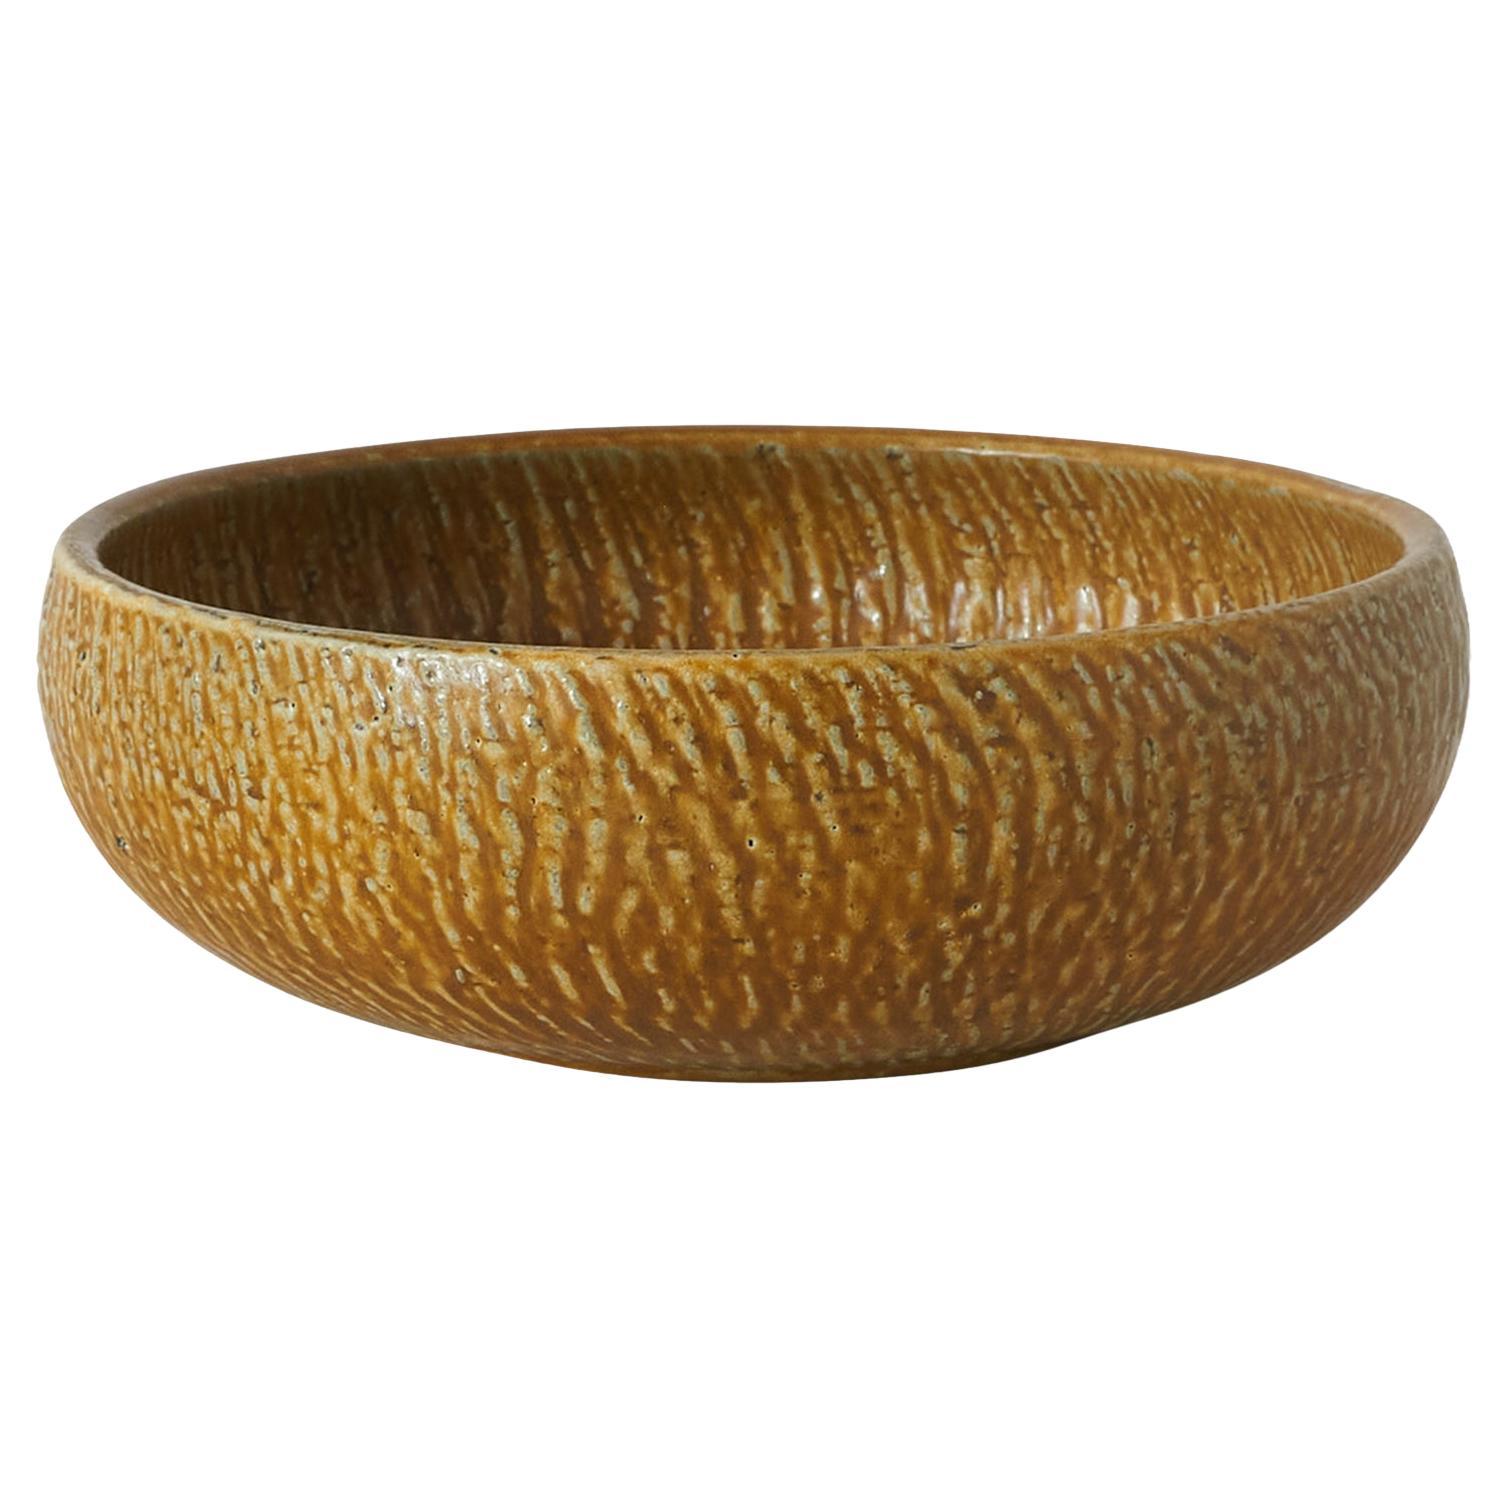 A rare large yellow stoneware bowl by Gunnar Nylund For Sale